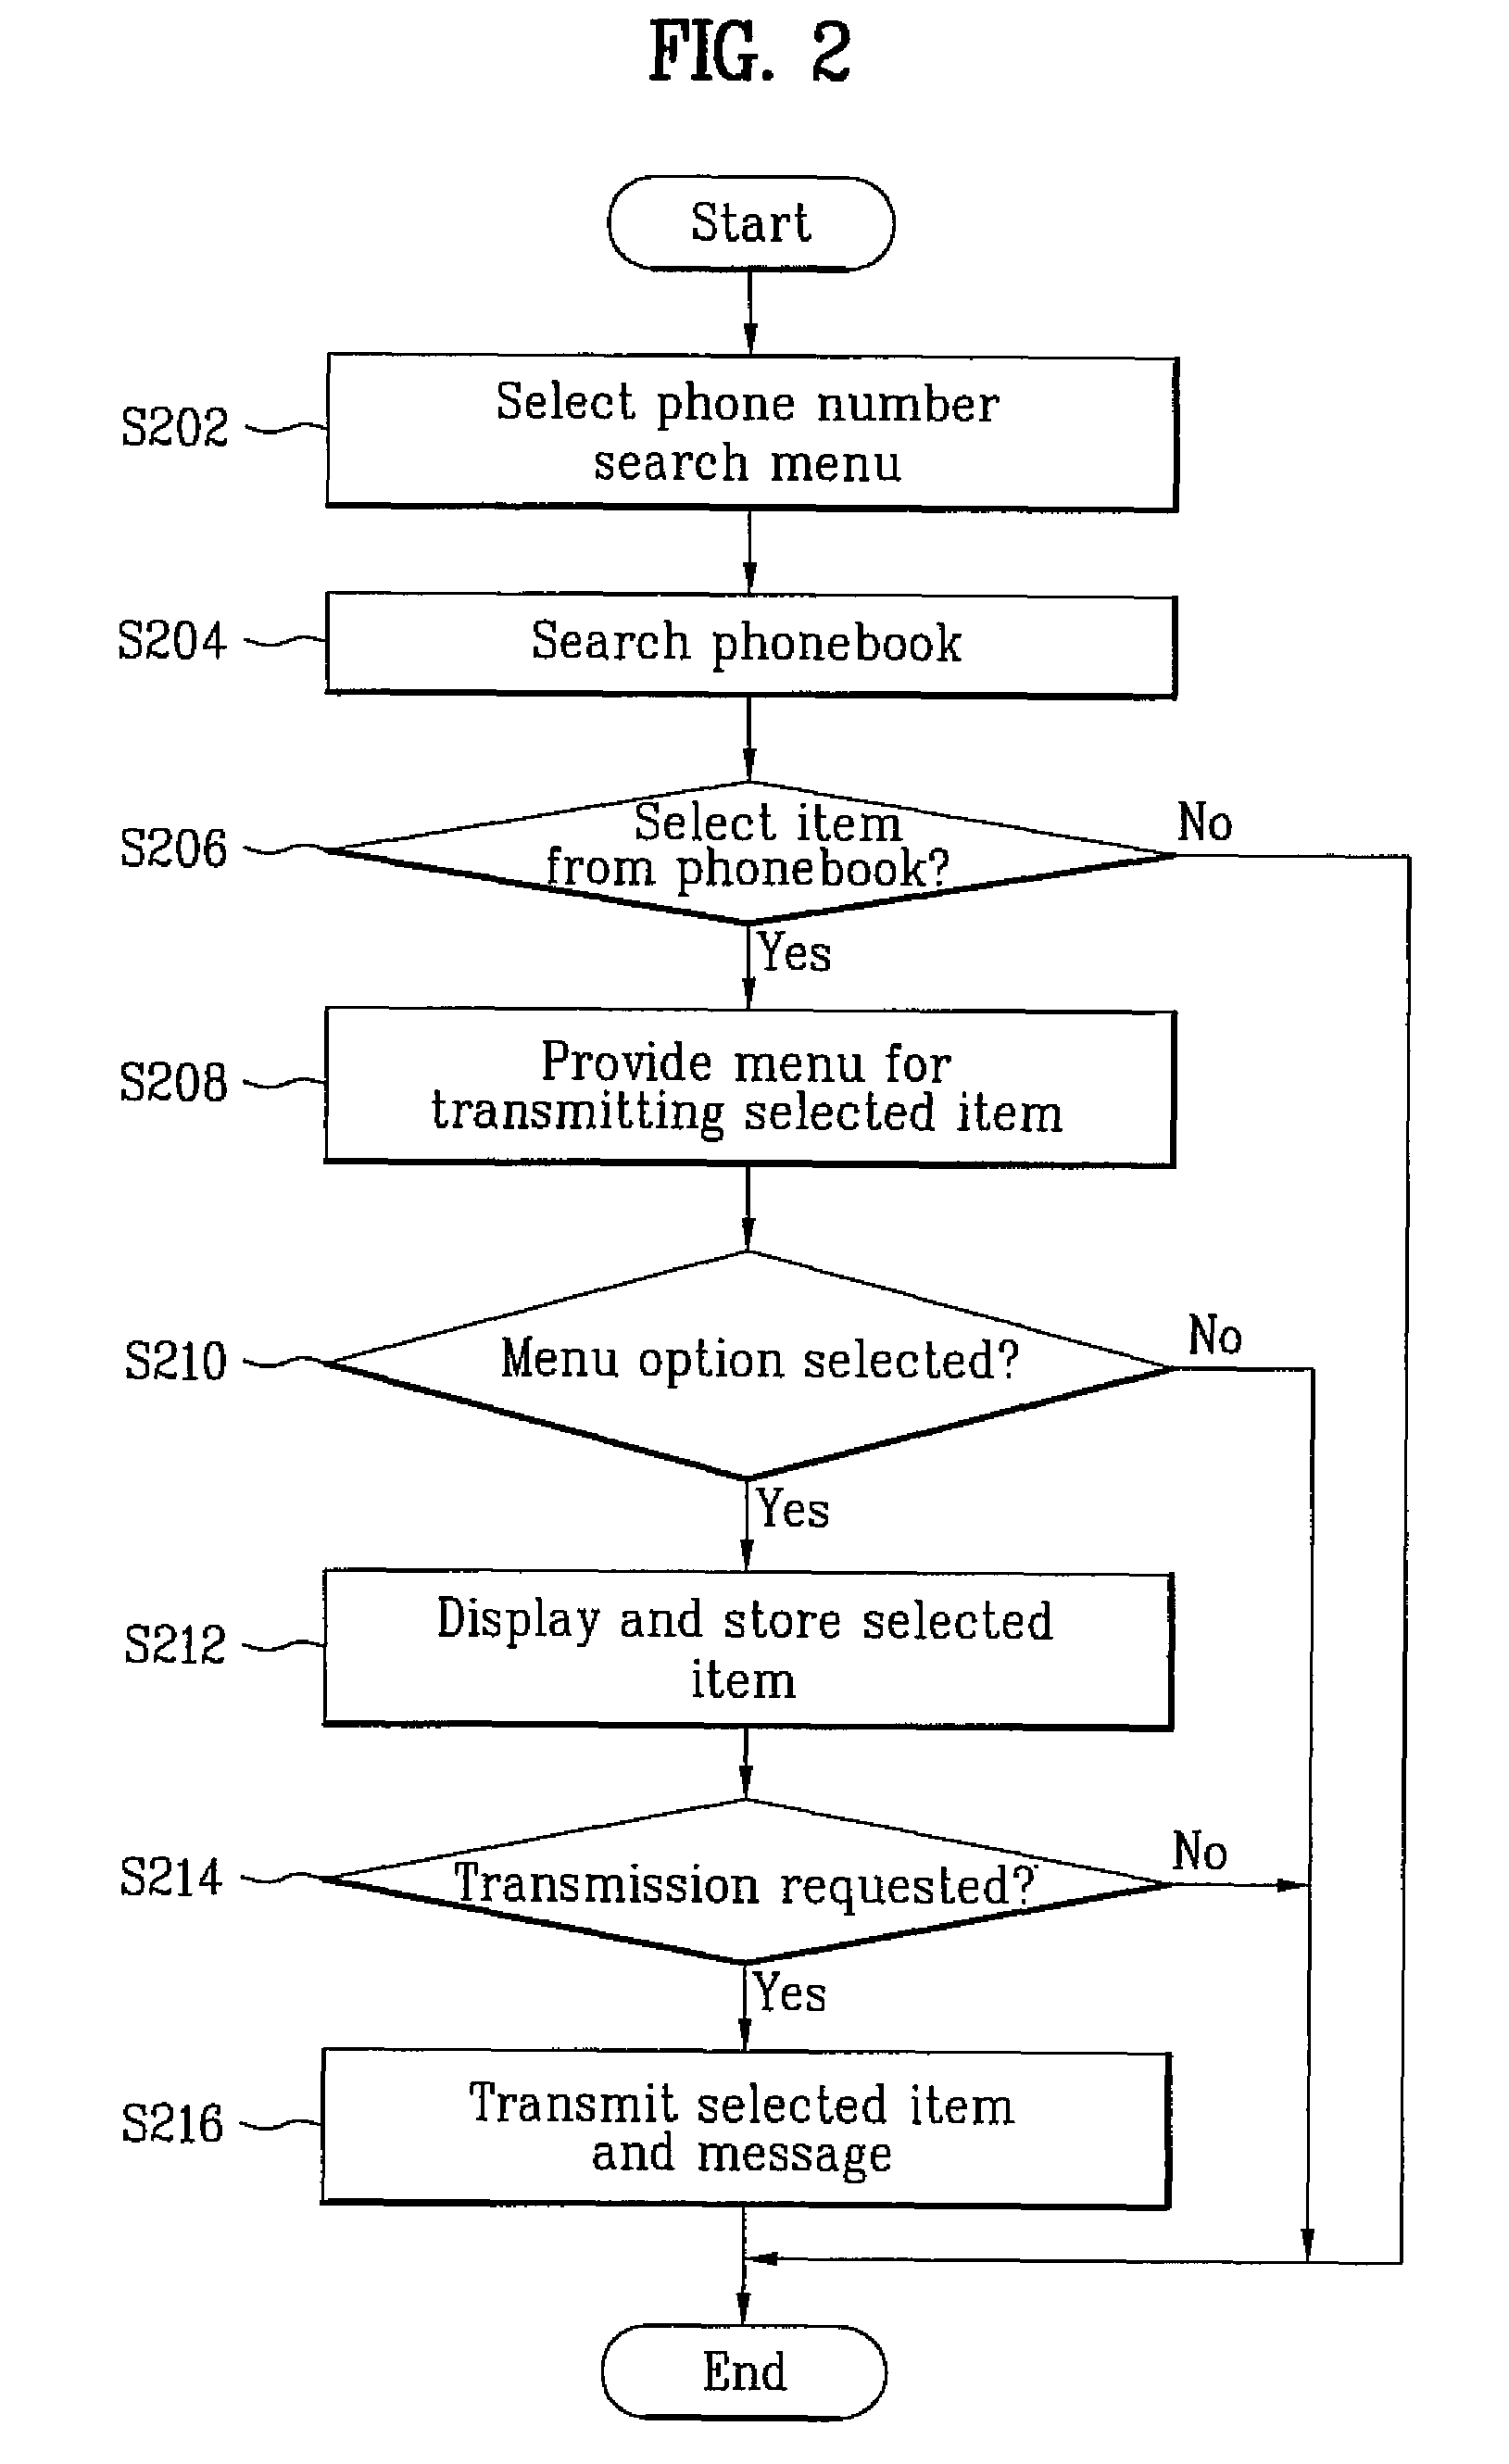 Transmission of database records between mobile communication terminals